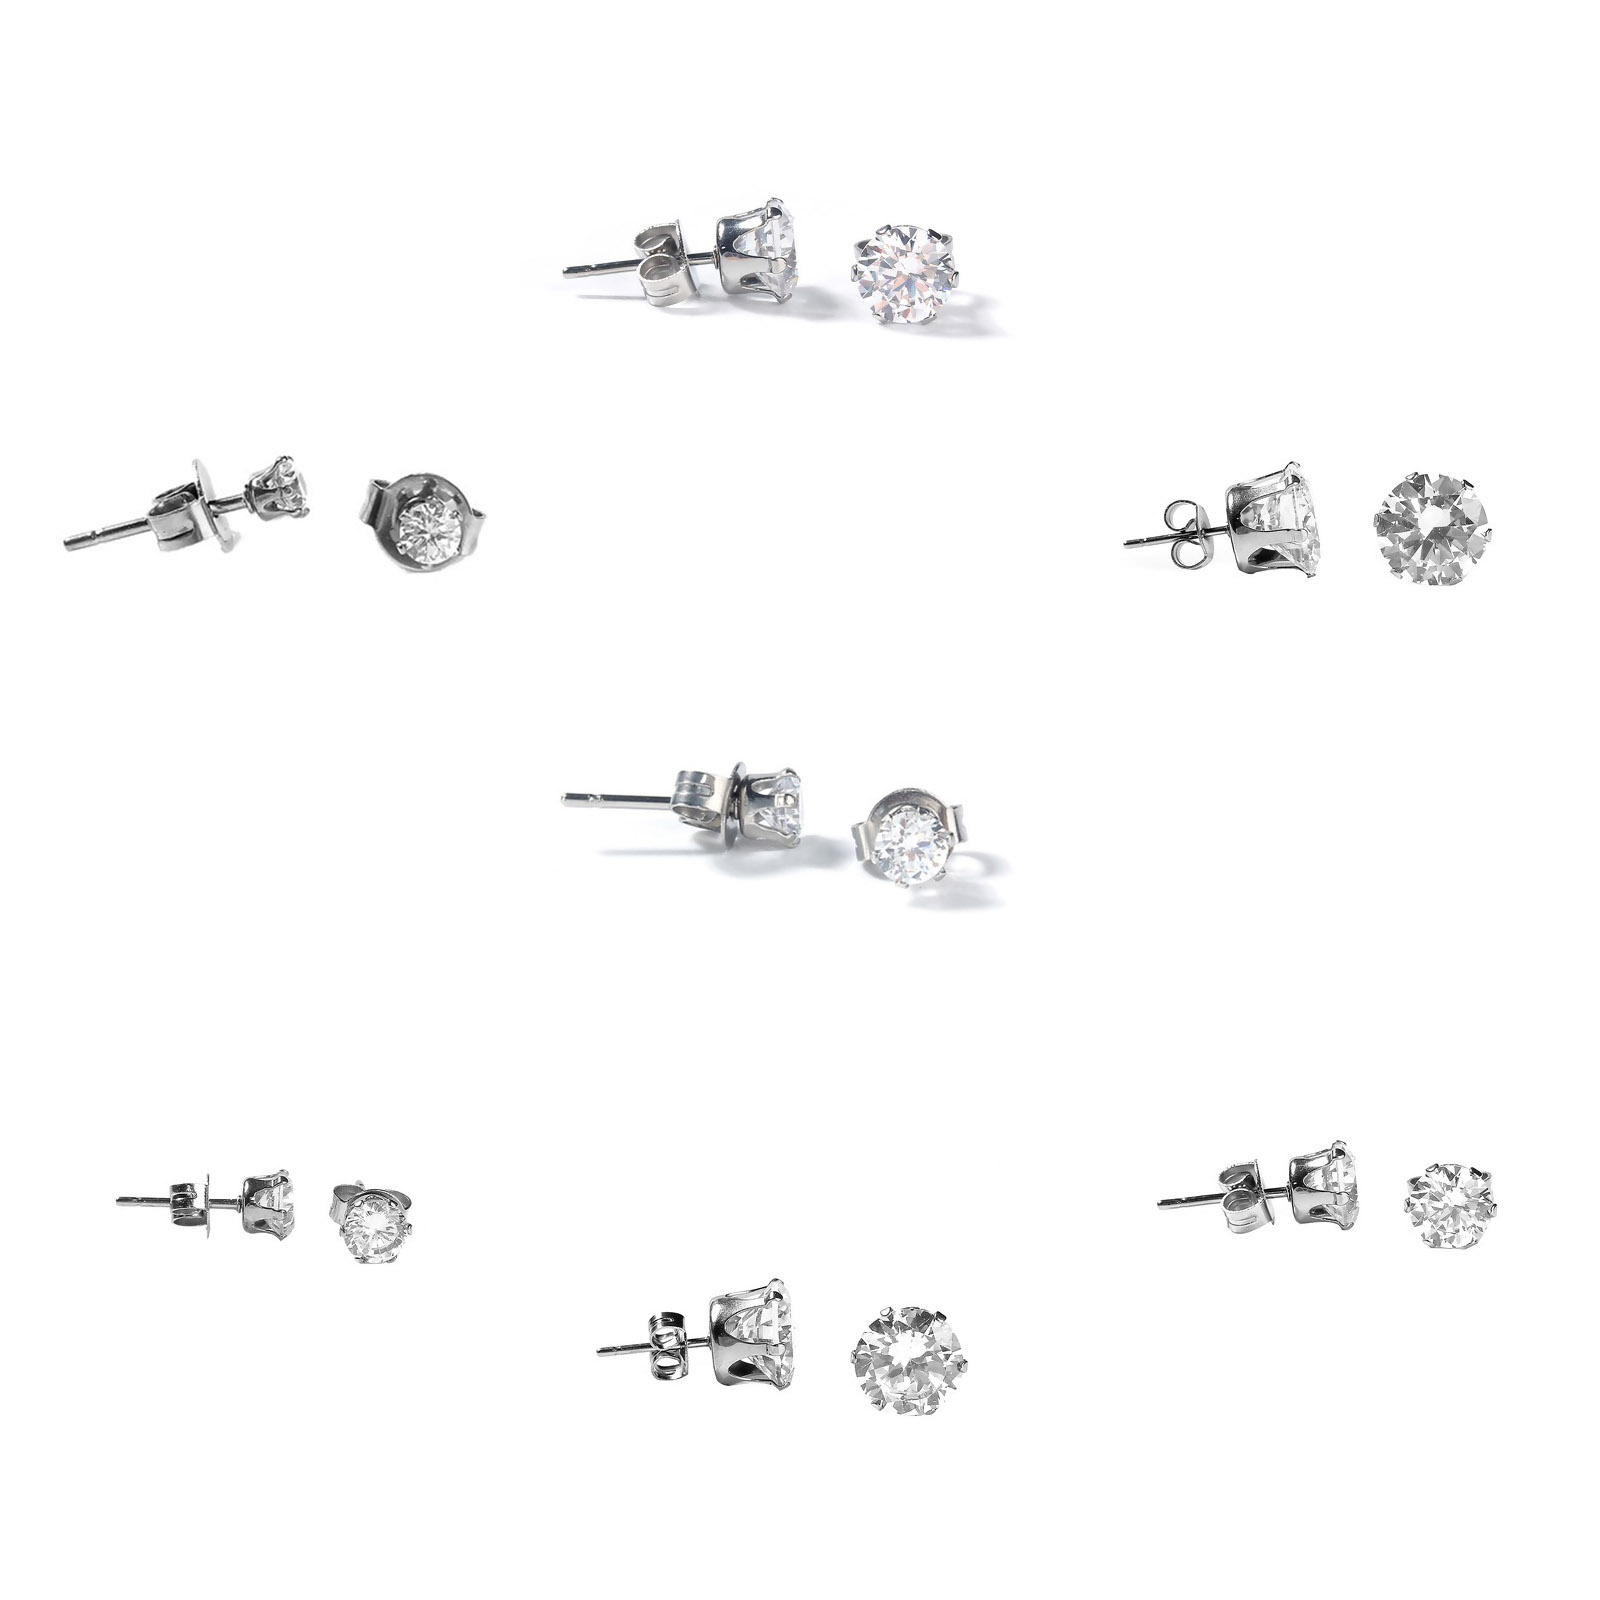 Picture of 304 Stainless Steel & Cubic Zirconia Ear Post Stud Earrings Silver Tone Transparent Clear Round 11mm( 3/8") x 10mm( 3/8"), Post/ Wire Size: (20 gauge), 1 Pair